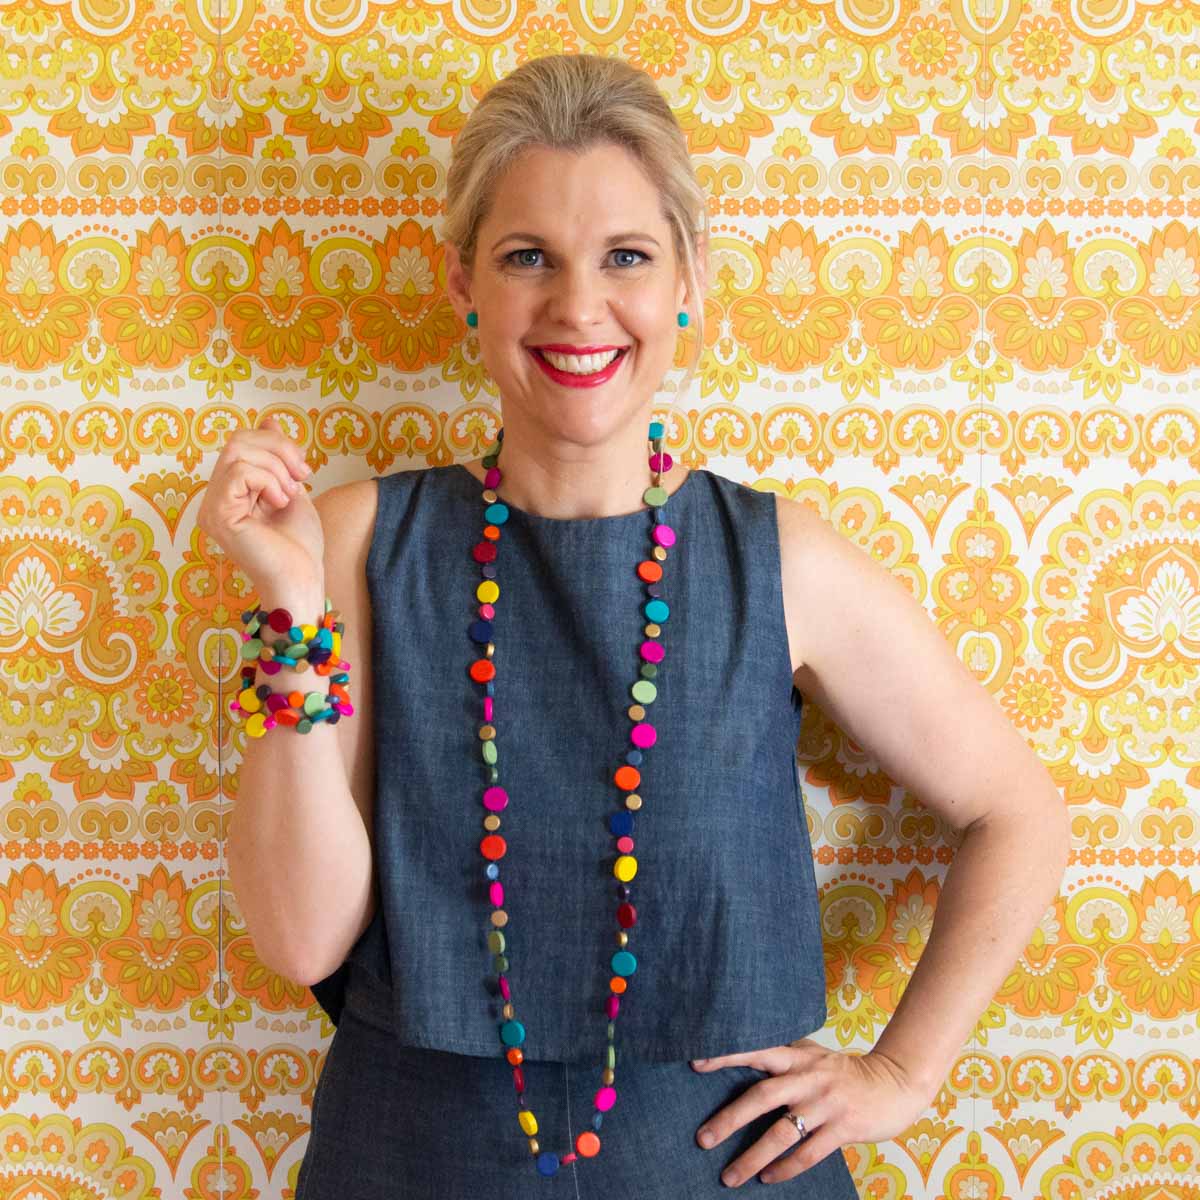 Women posing with rainbow coloured jewels in front of vintage orange and yellow background.